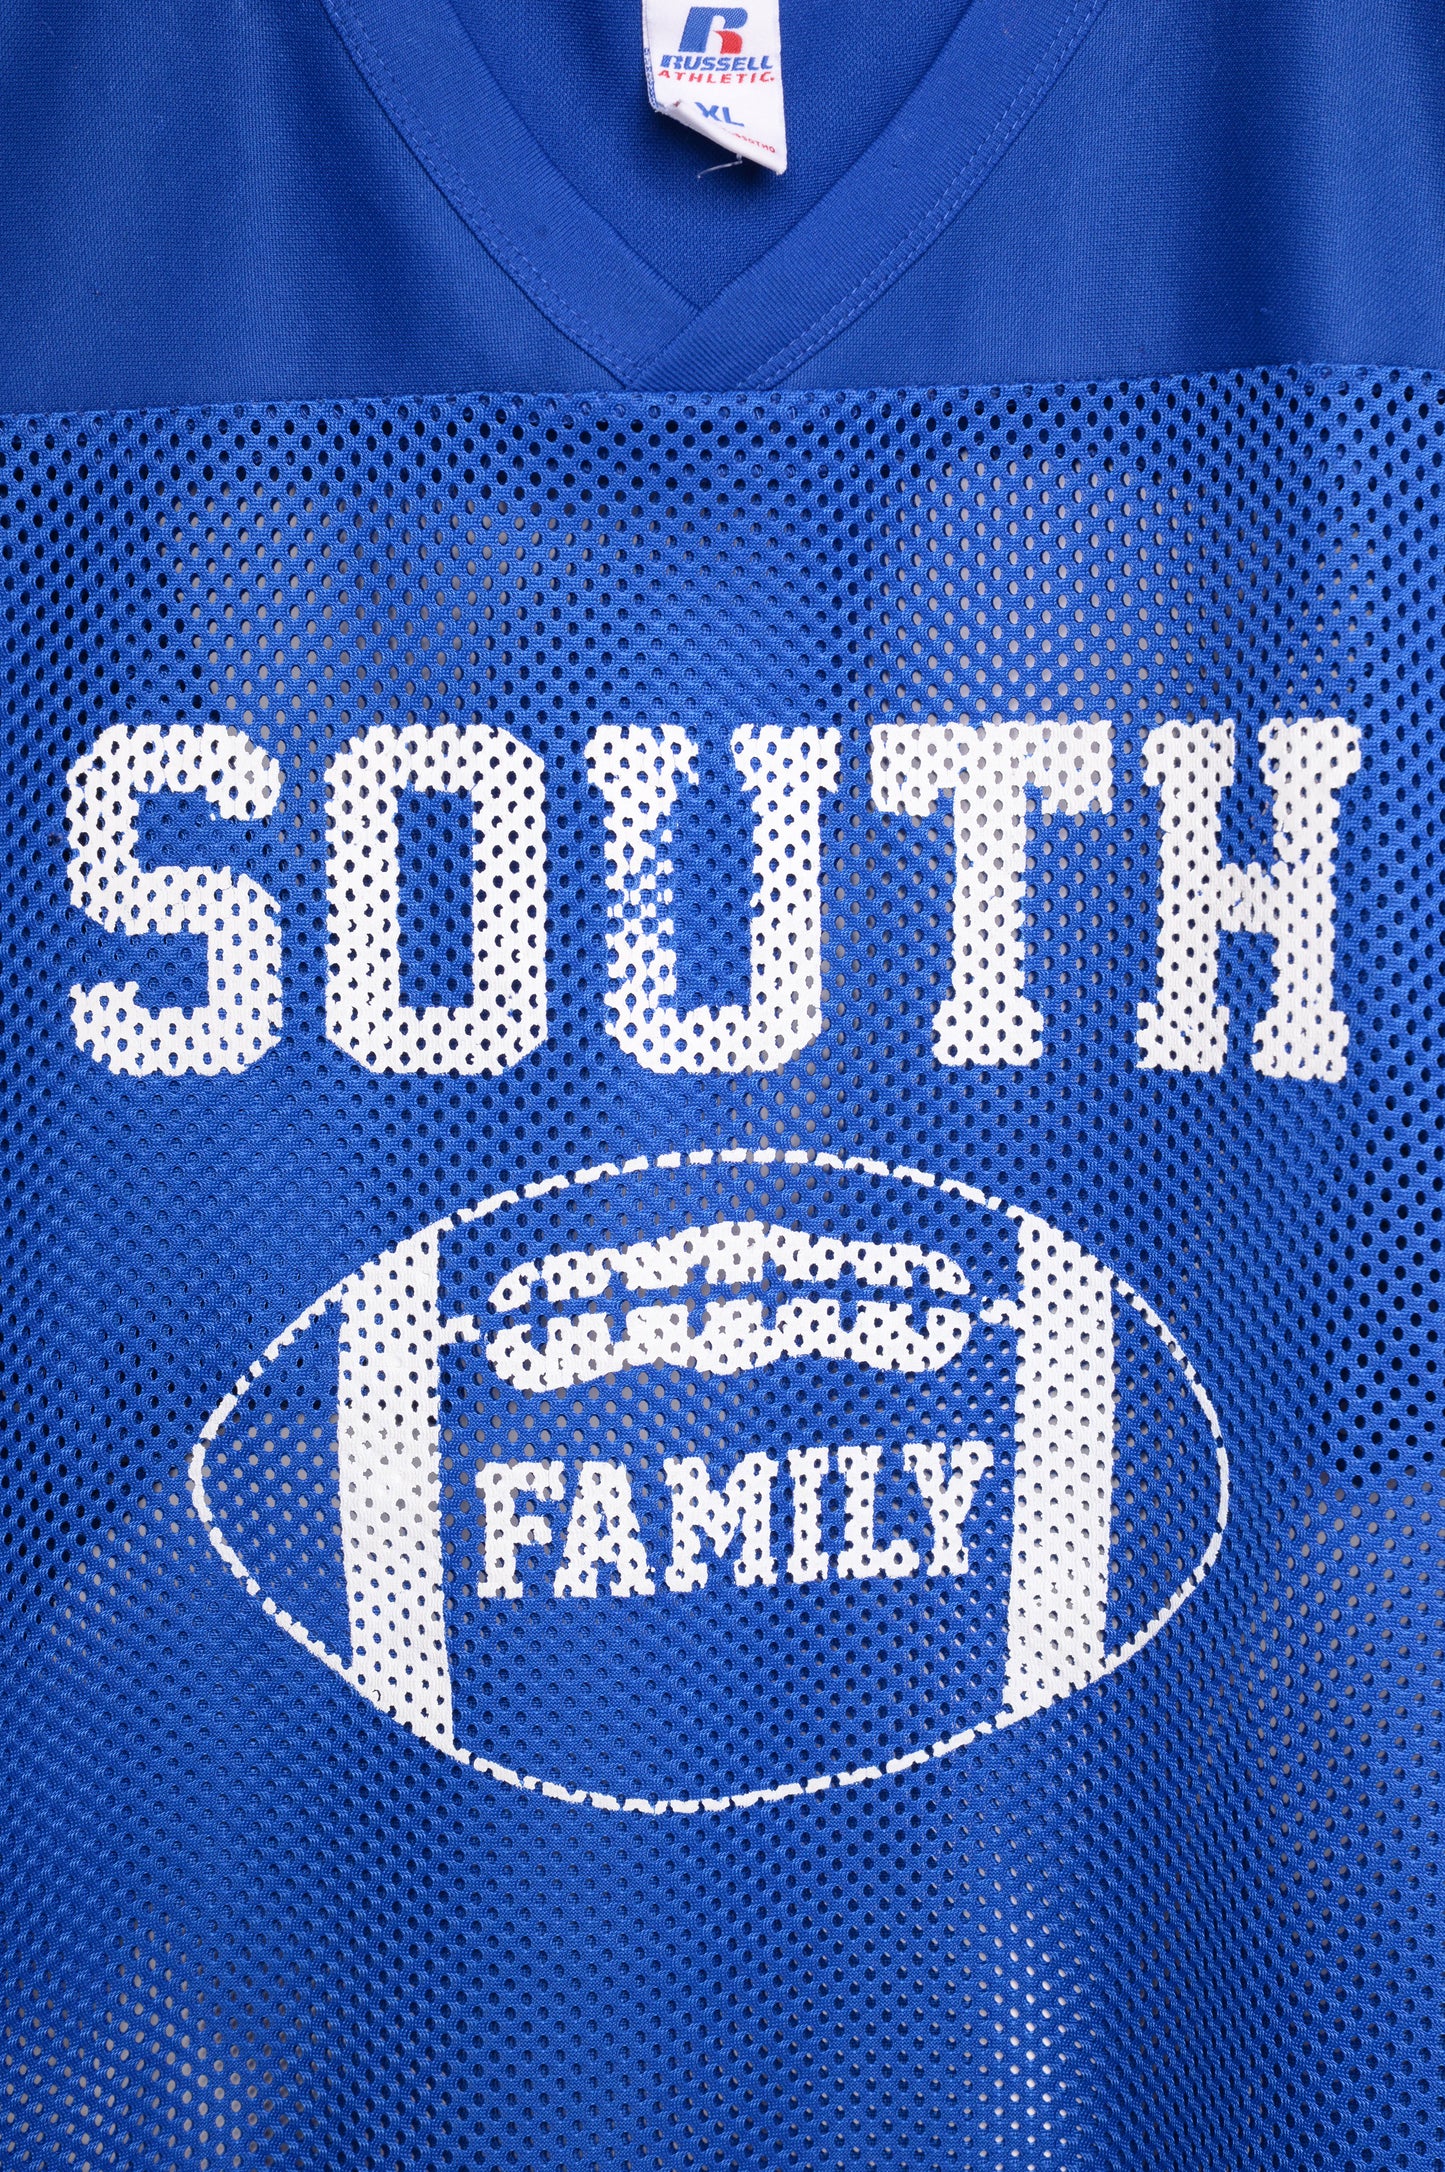 Russel Family Football Jersey